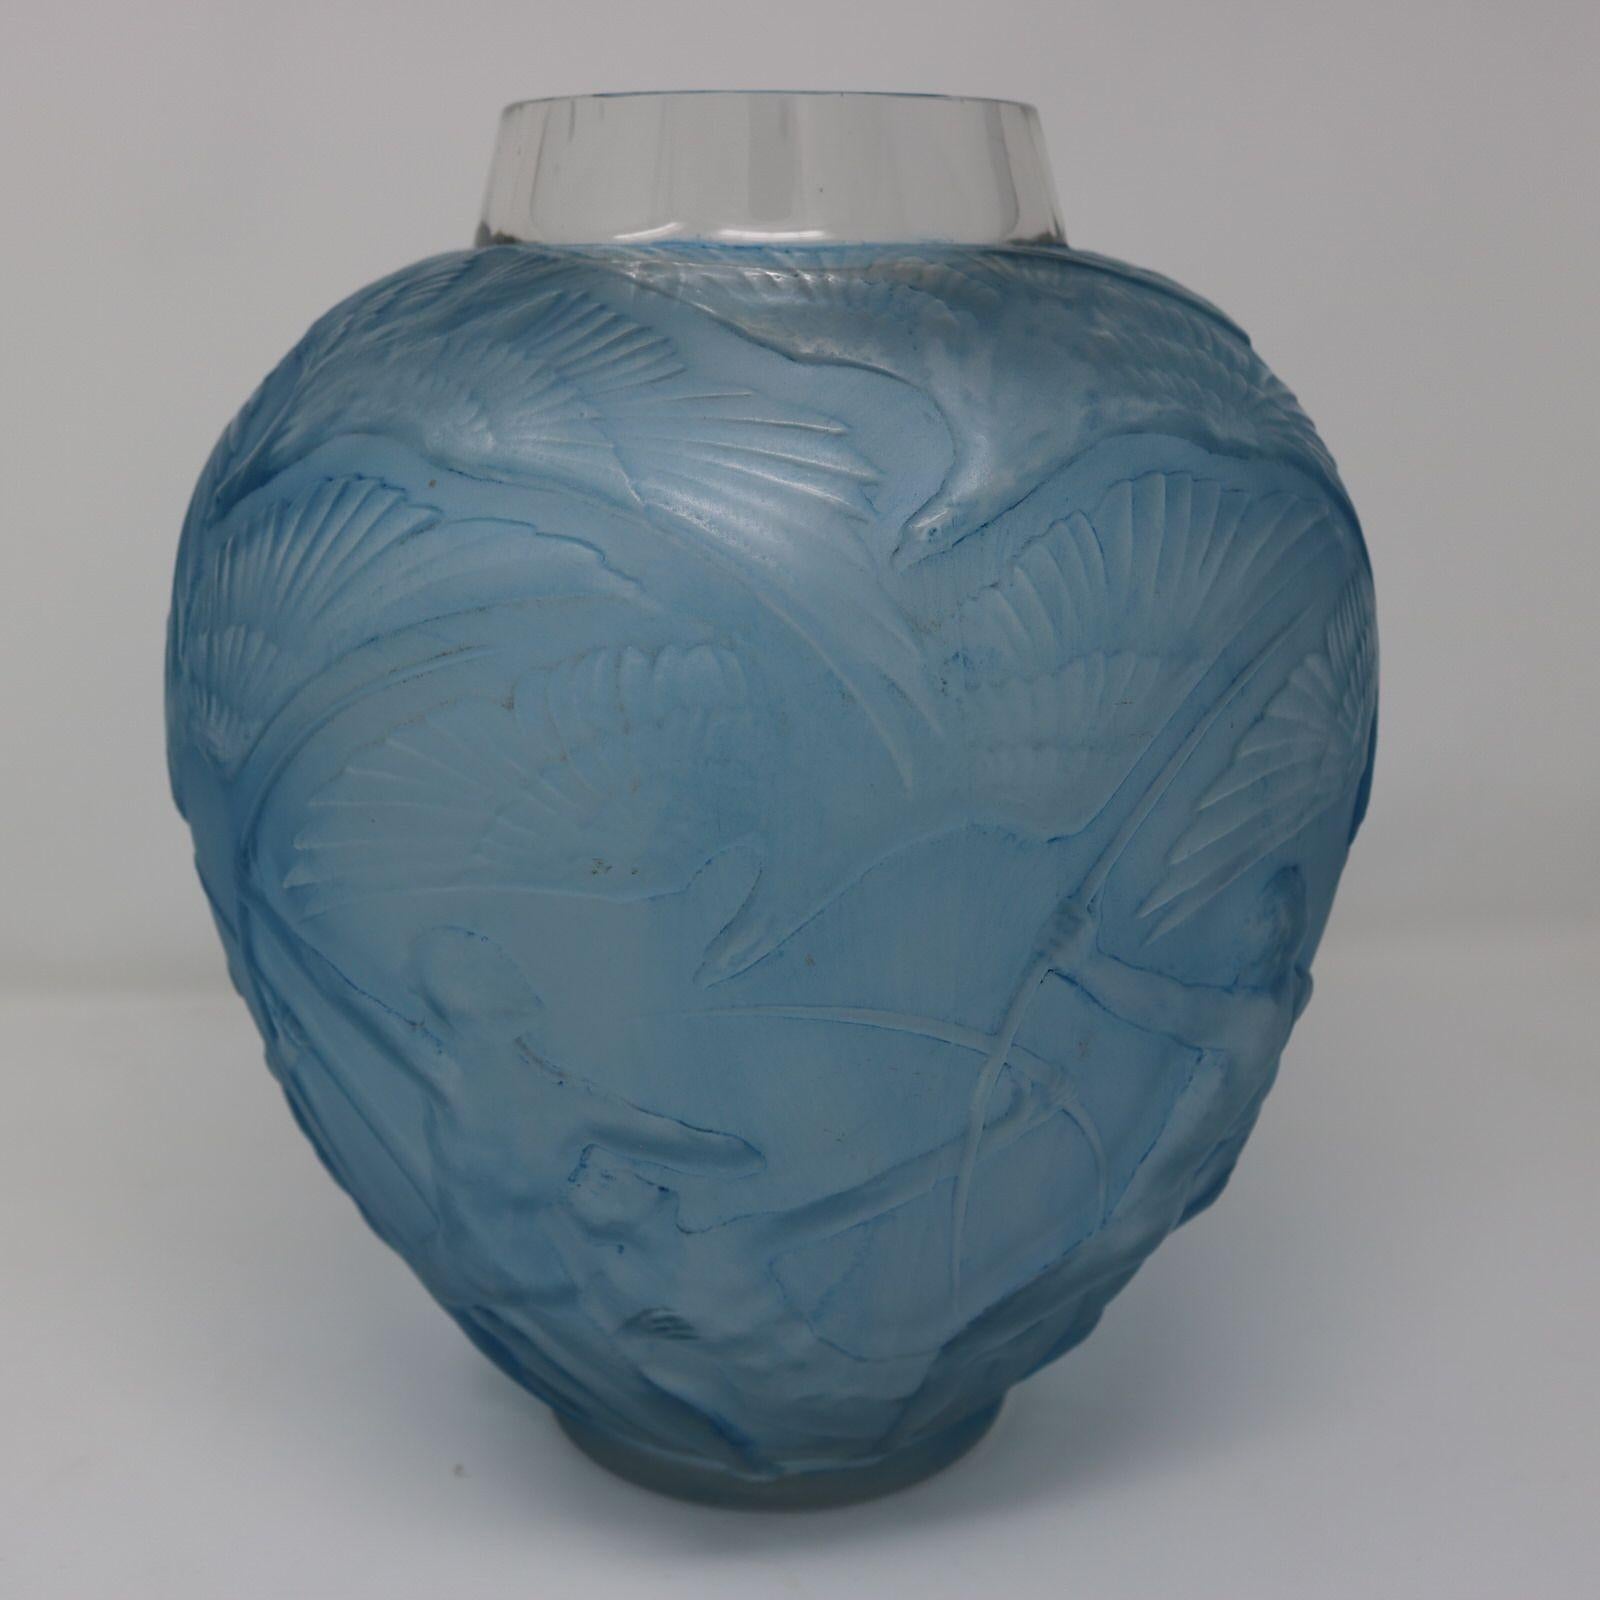 Rene Lalique Glass Archers Vase, Blue Stained 13